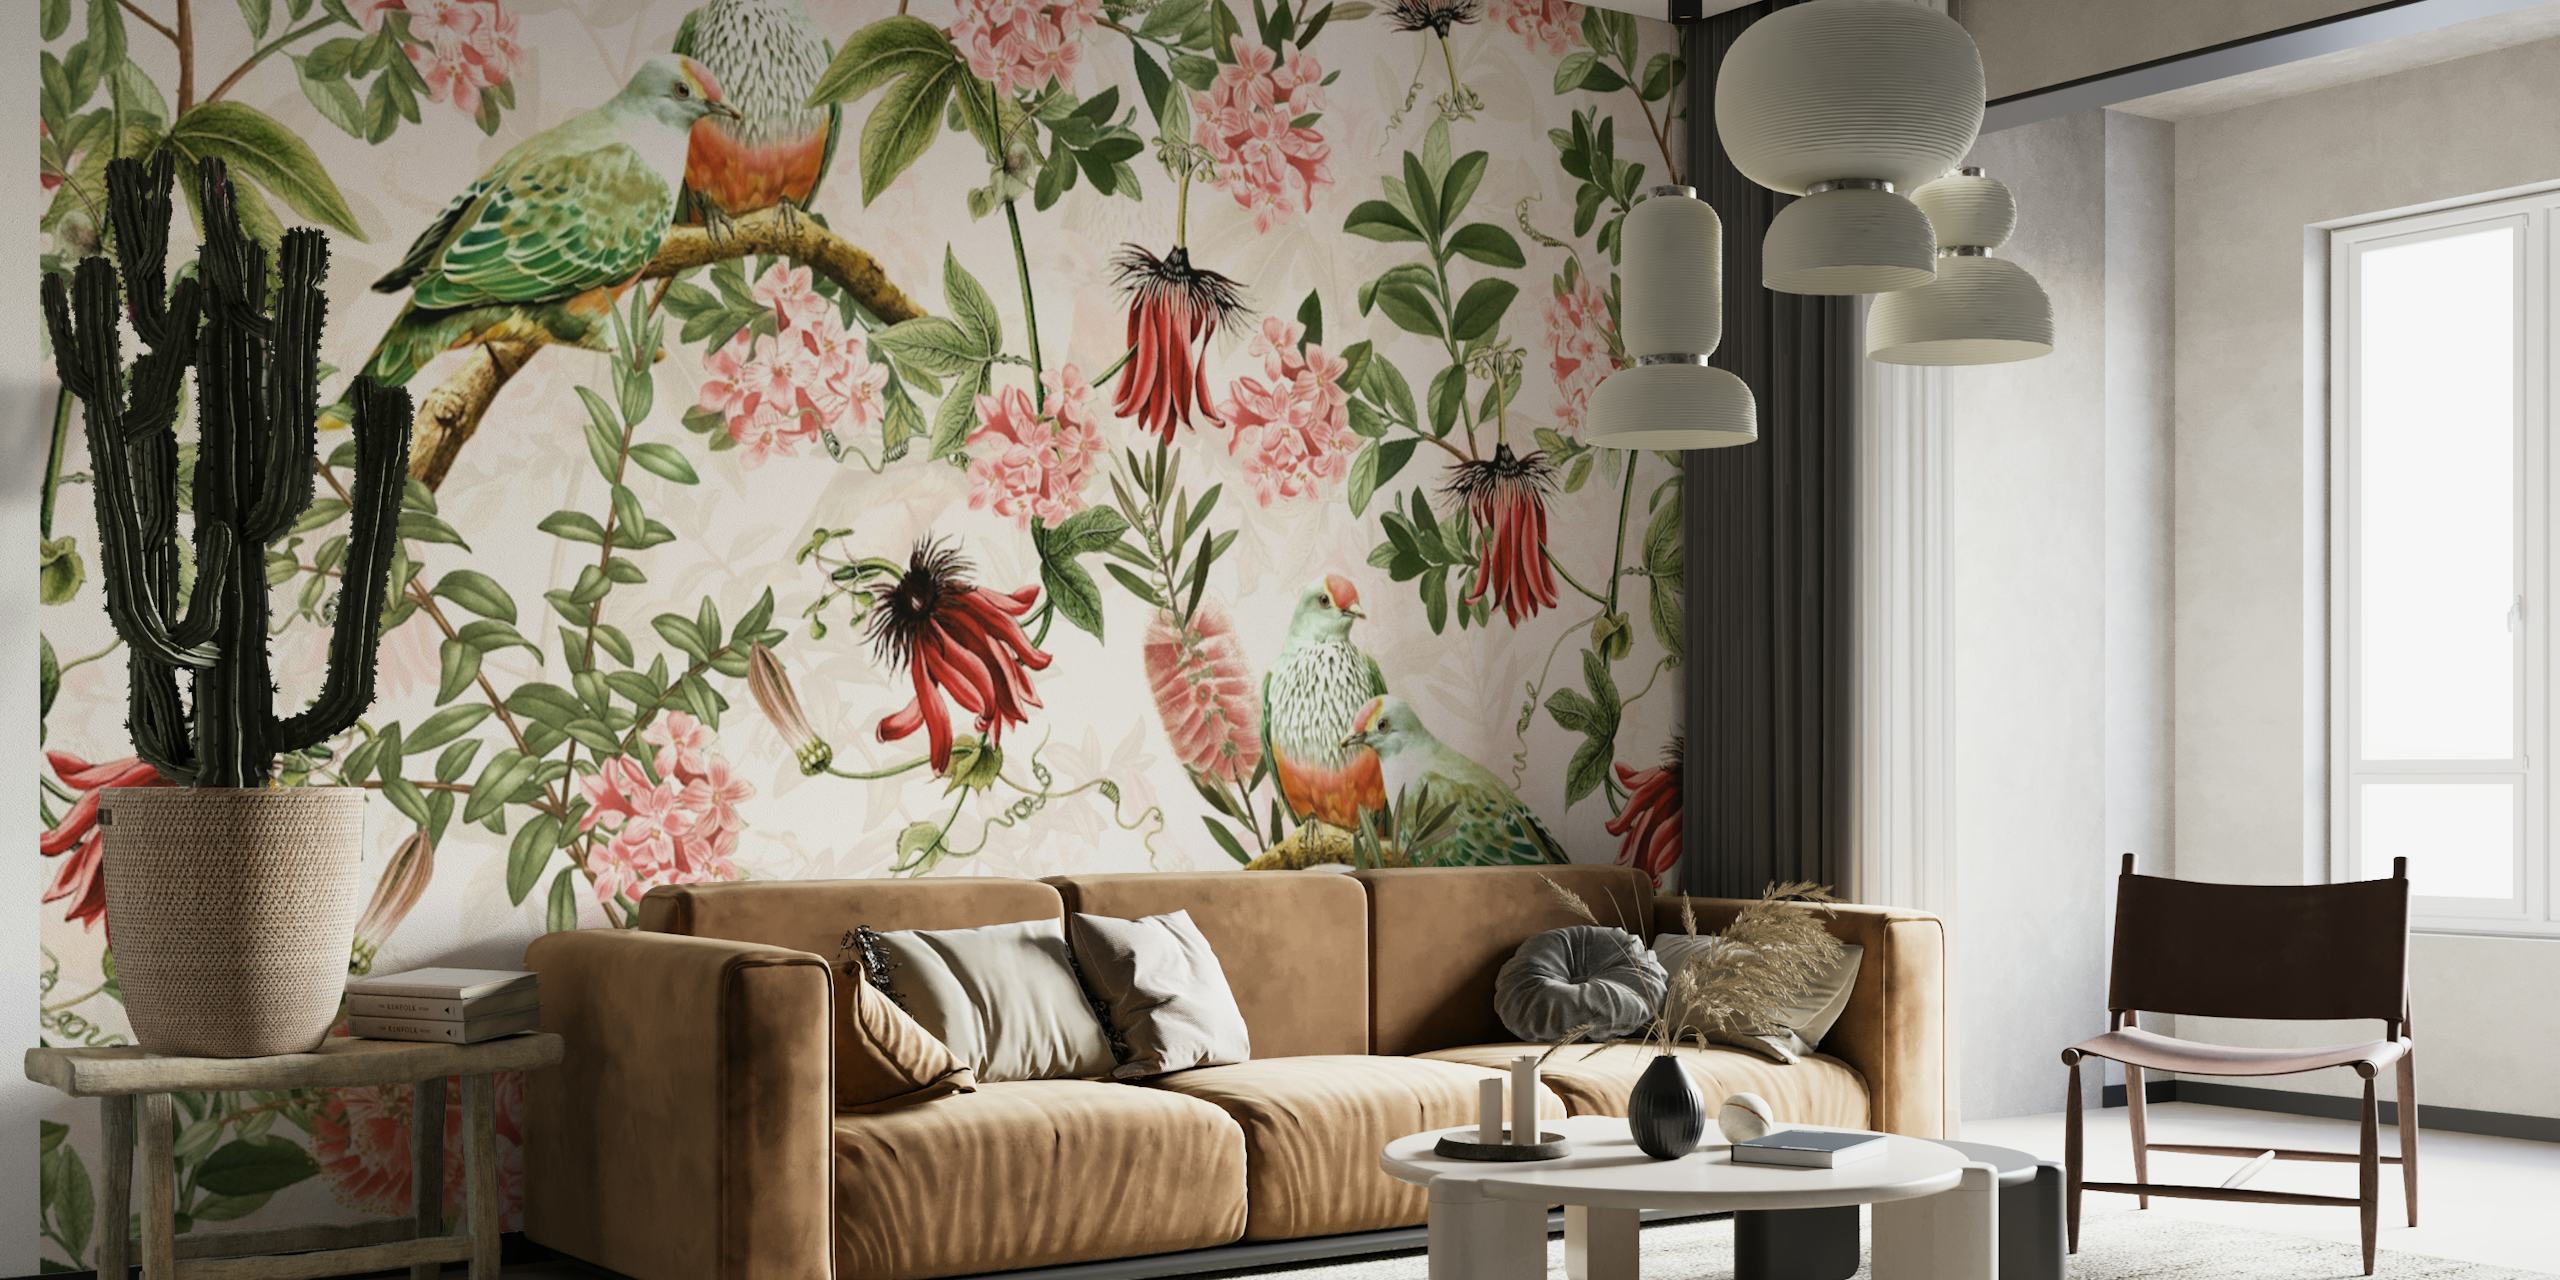 Exotic Birds And Passionflowers wallpaper